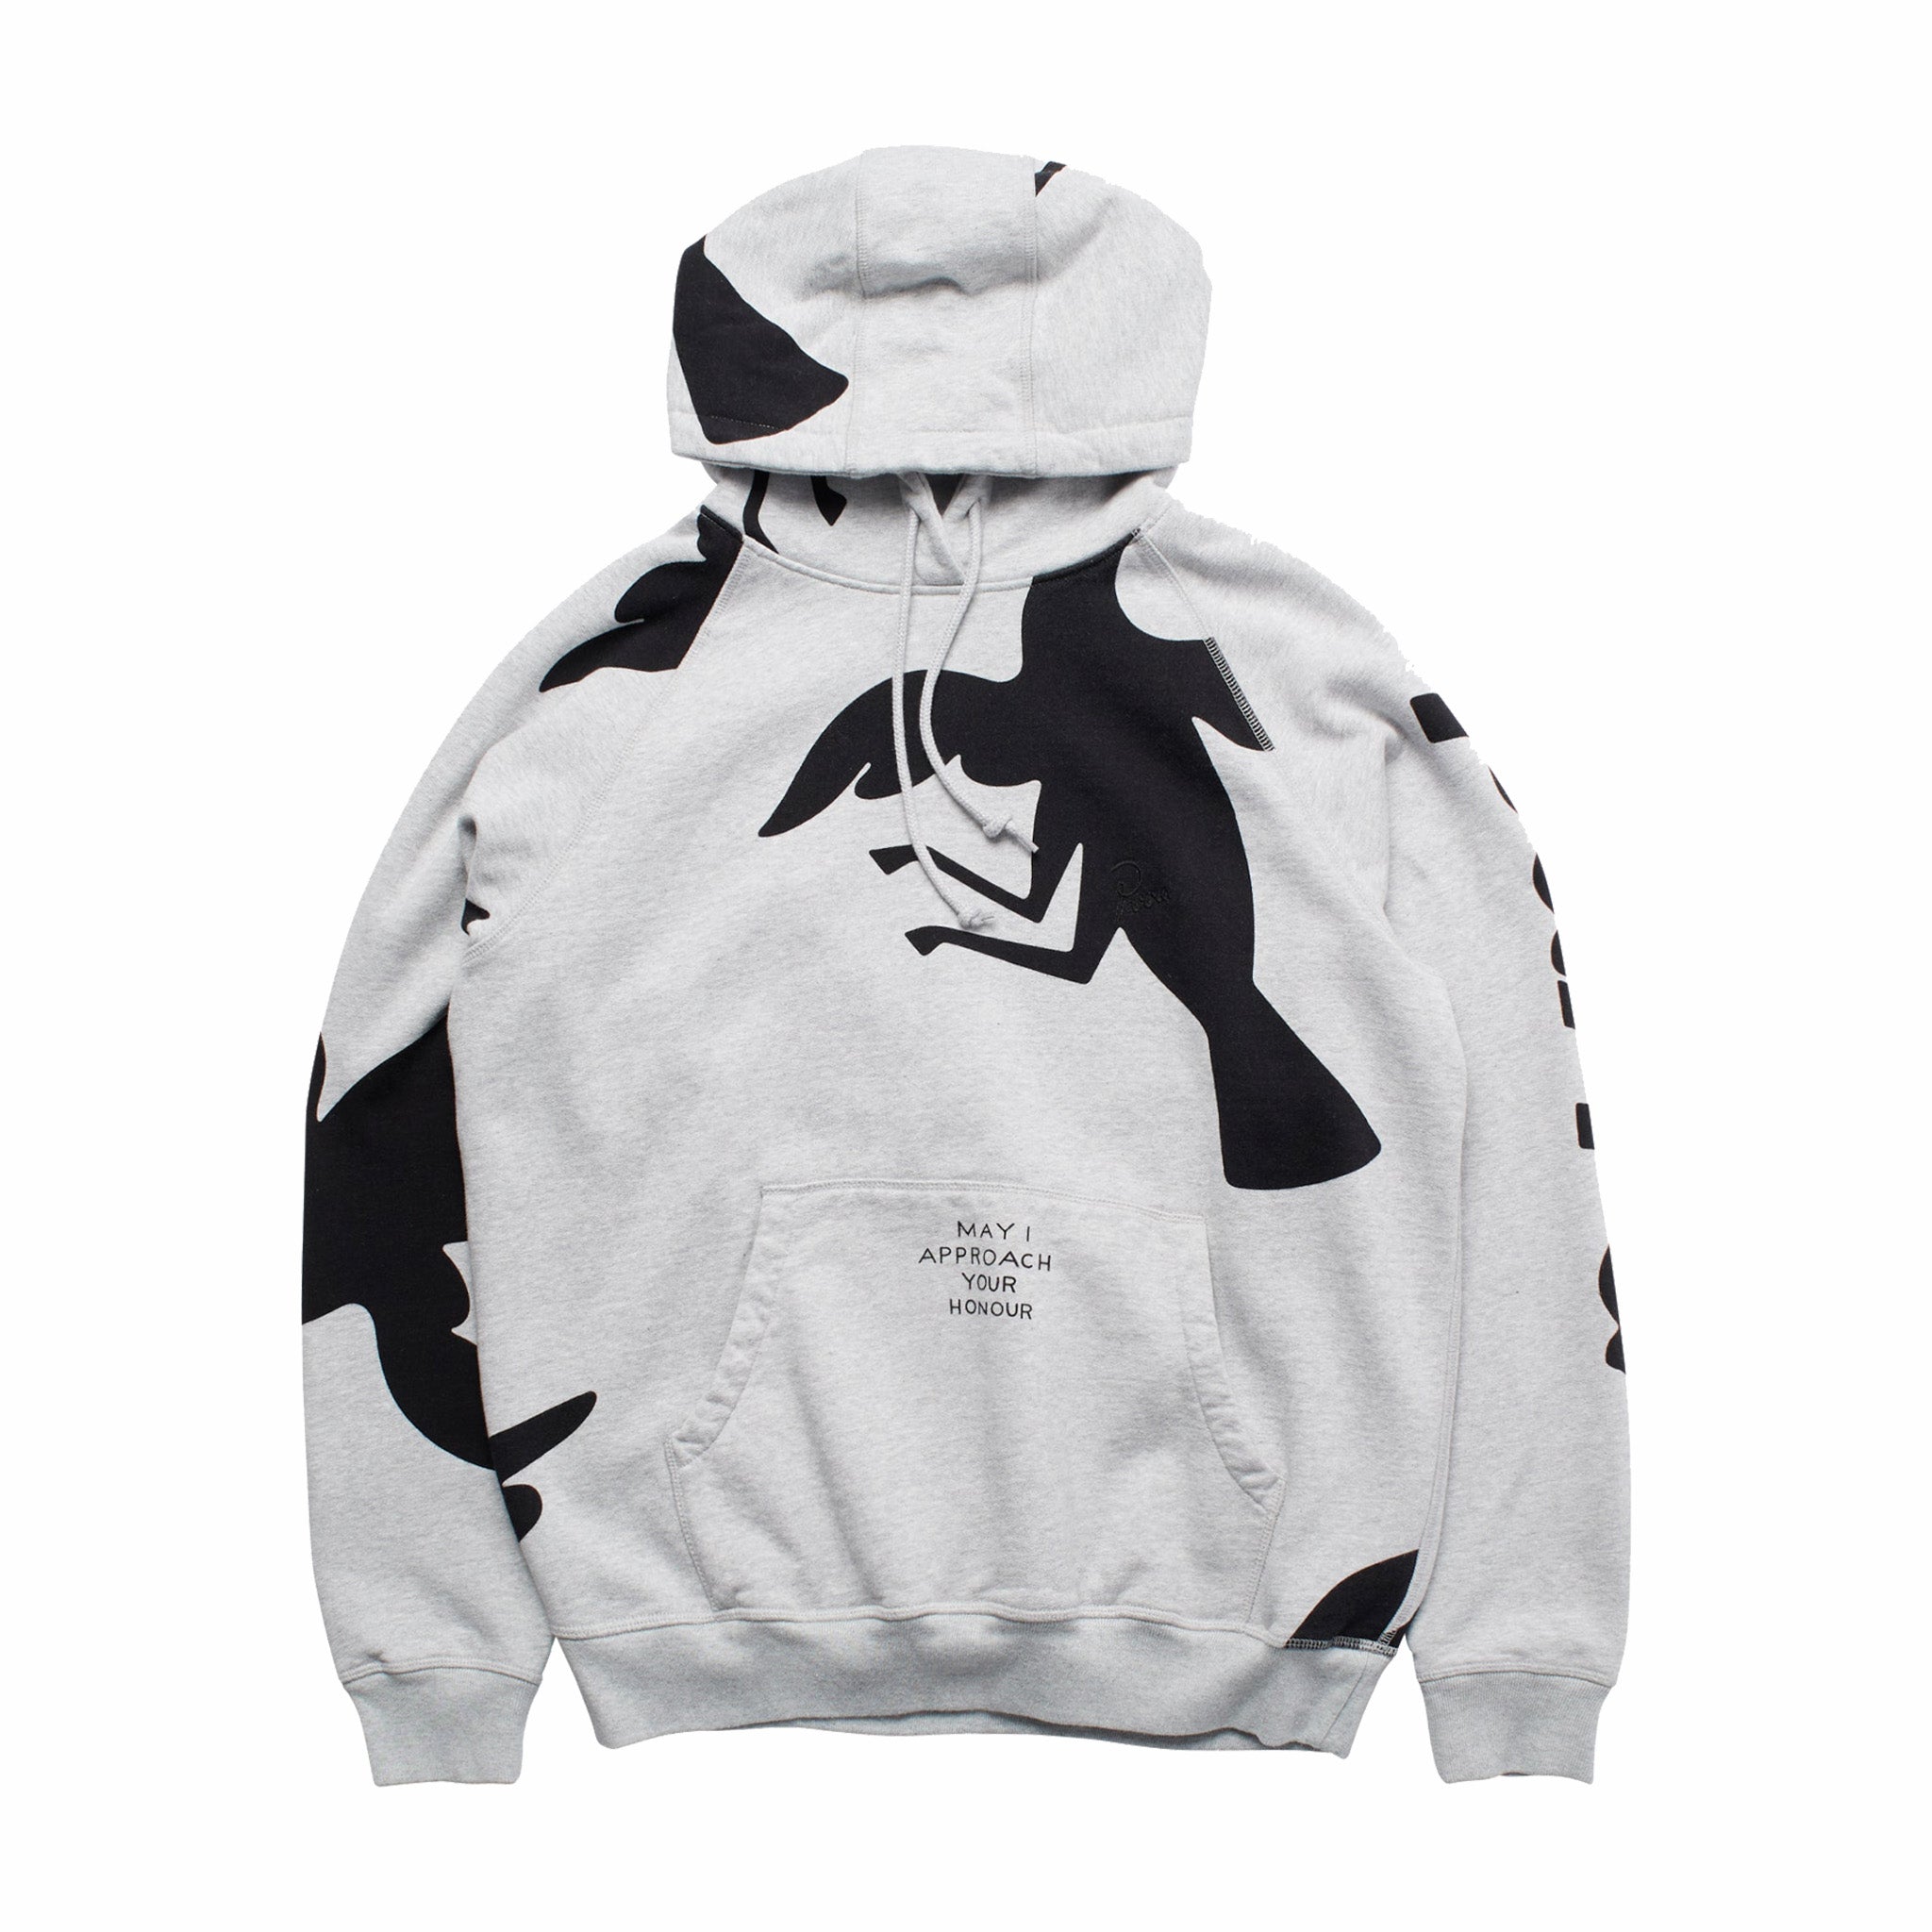 by Parra Clipped Wings Hooded Sweatshirt (Heather Grey) - August Shop